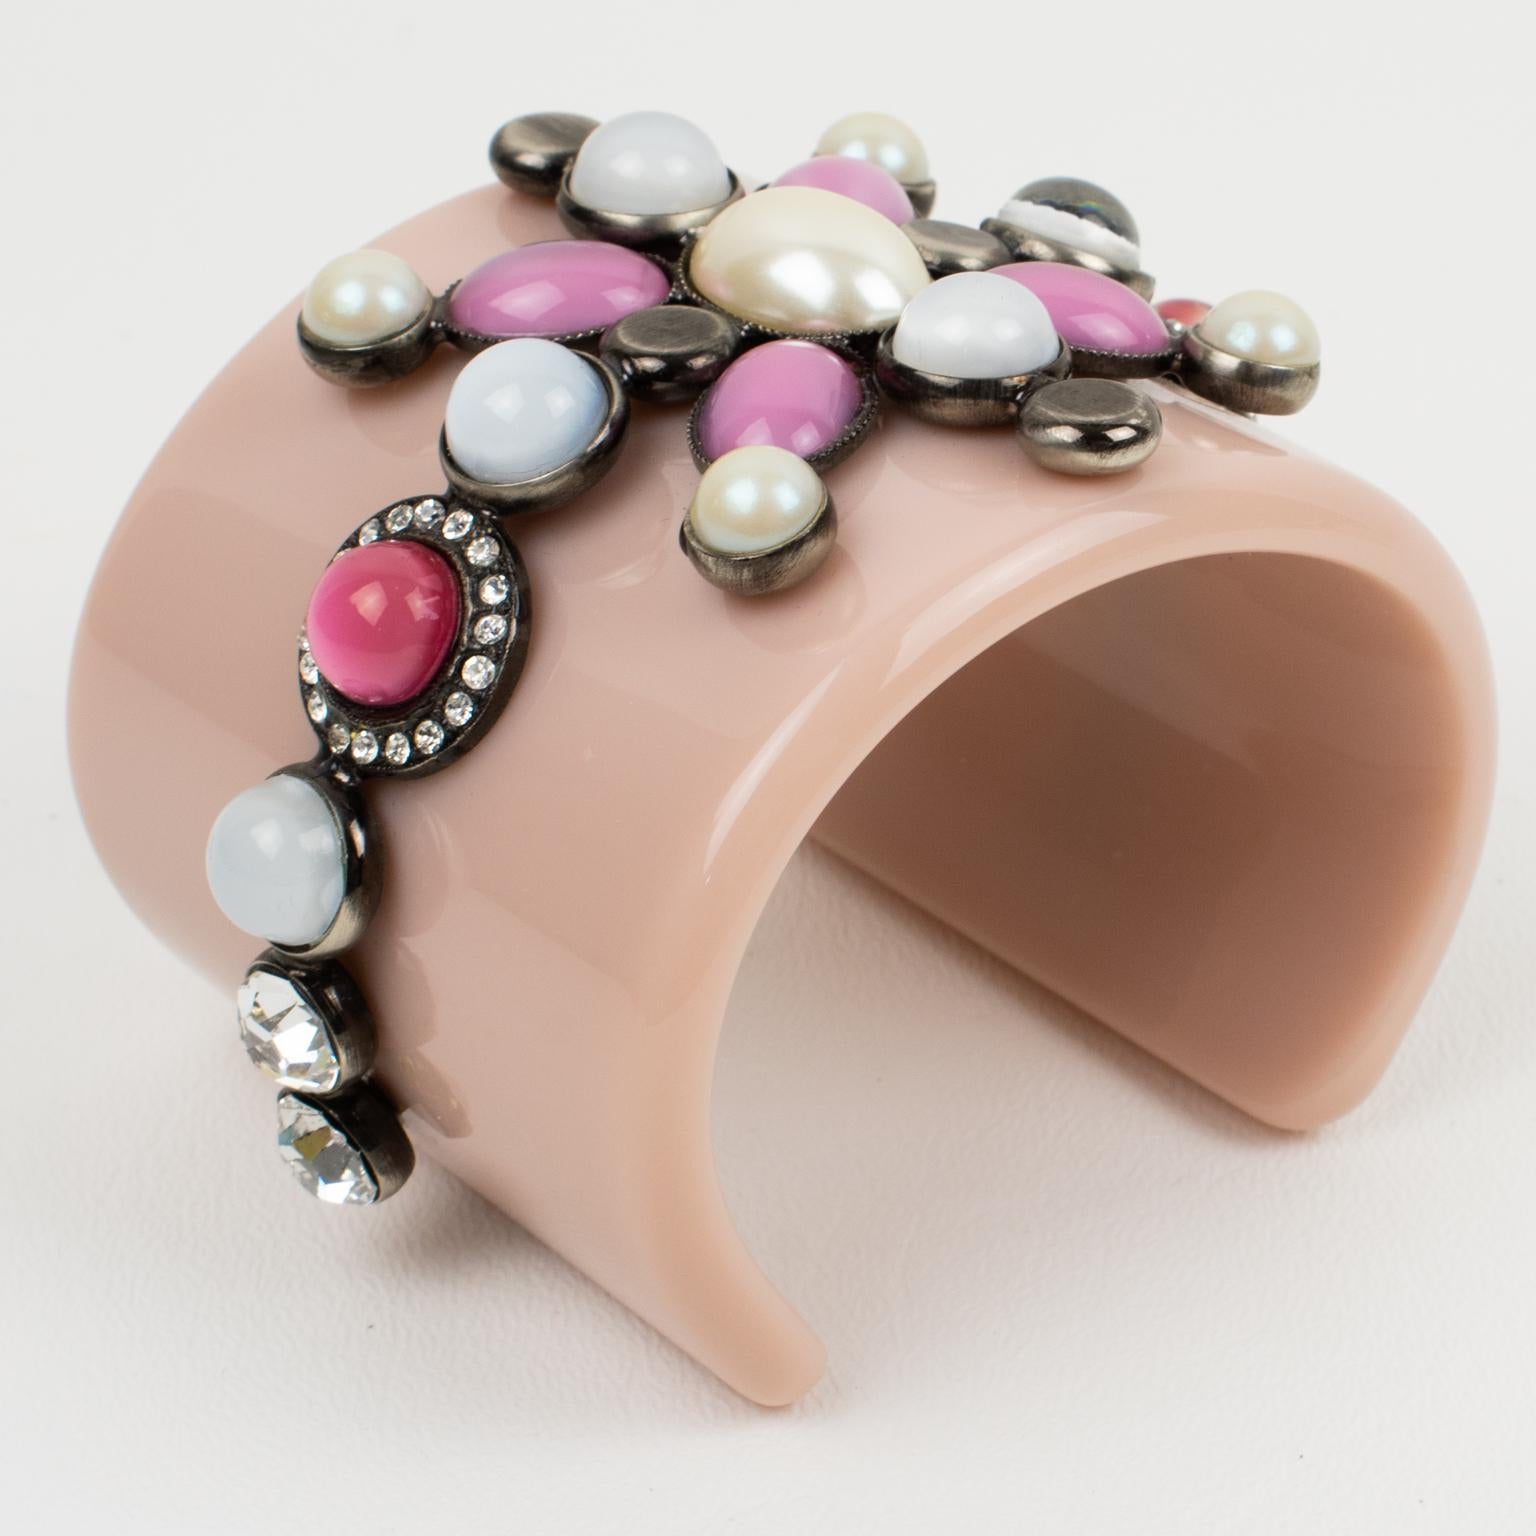 Emilio Pucci designed this adorable massive resin baroque bracelet bangle. The chunky cuff is made of pale pink resin ornate with a gunmetal framing geometric design topped with poured glass cabochons and crystal rhinestones. The jewel design has